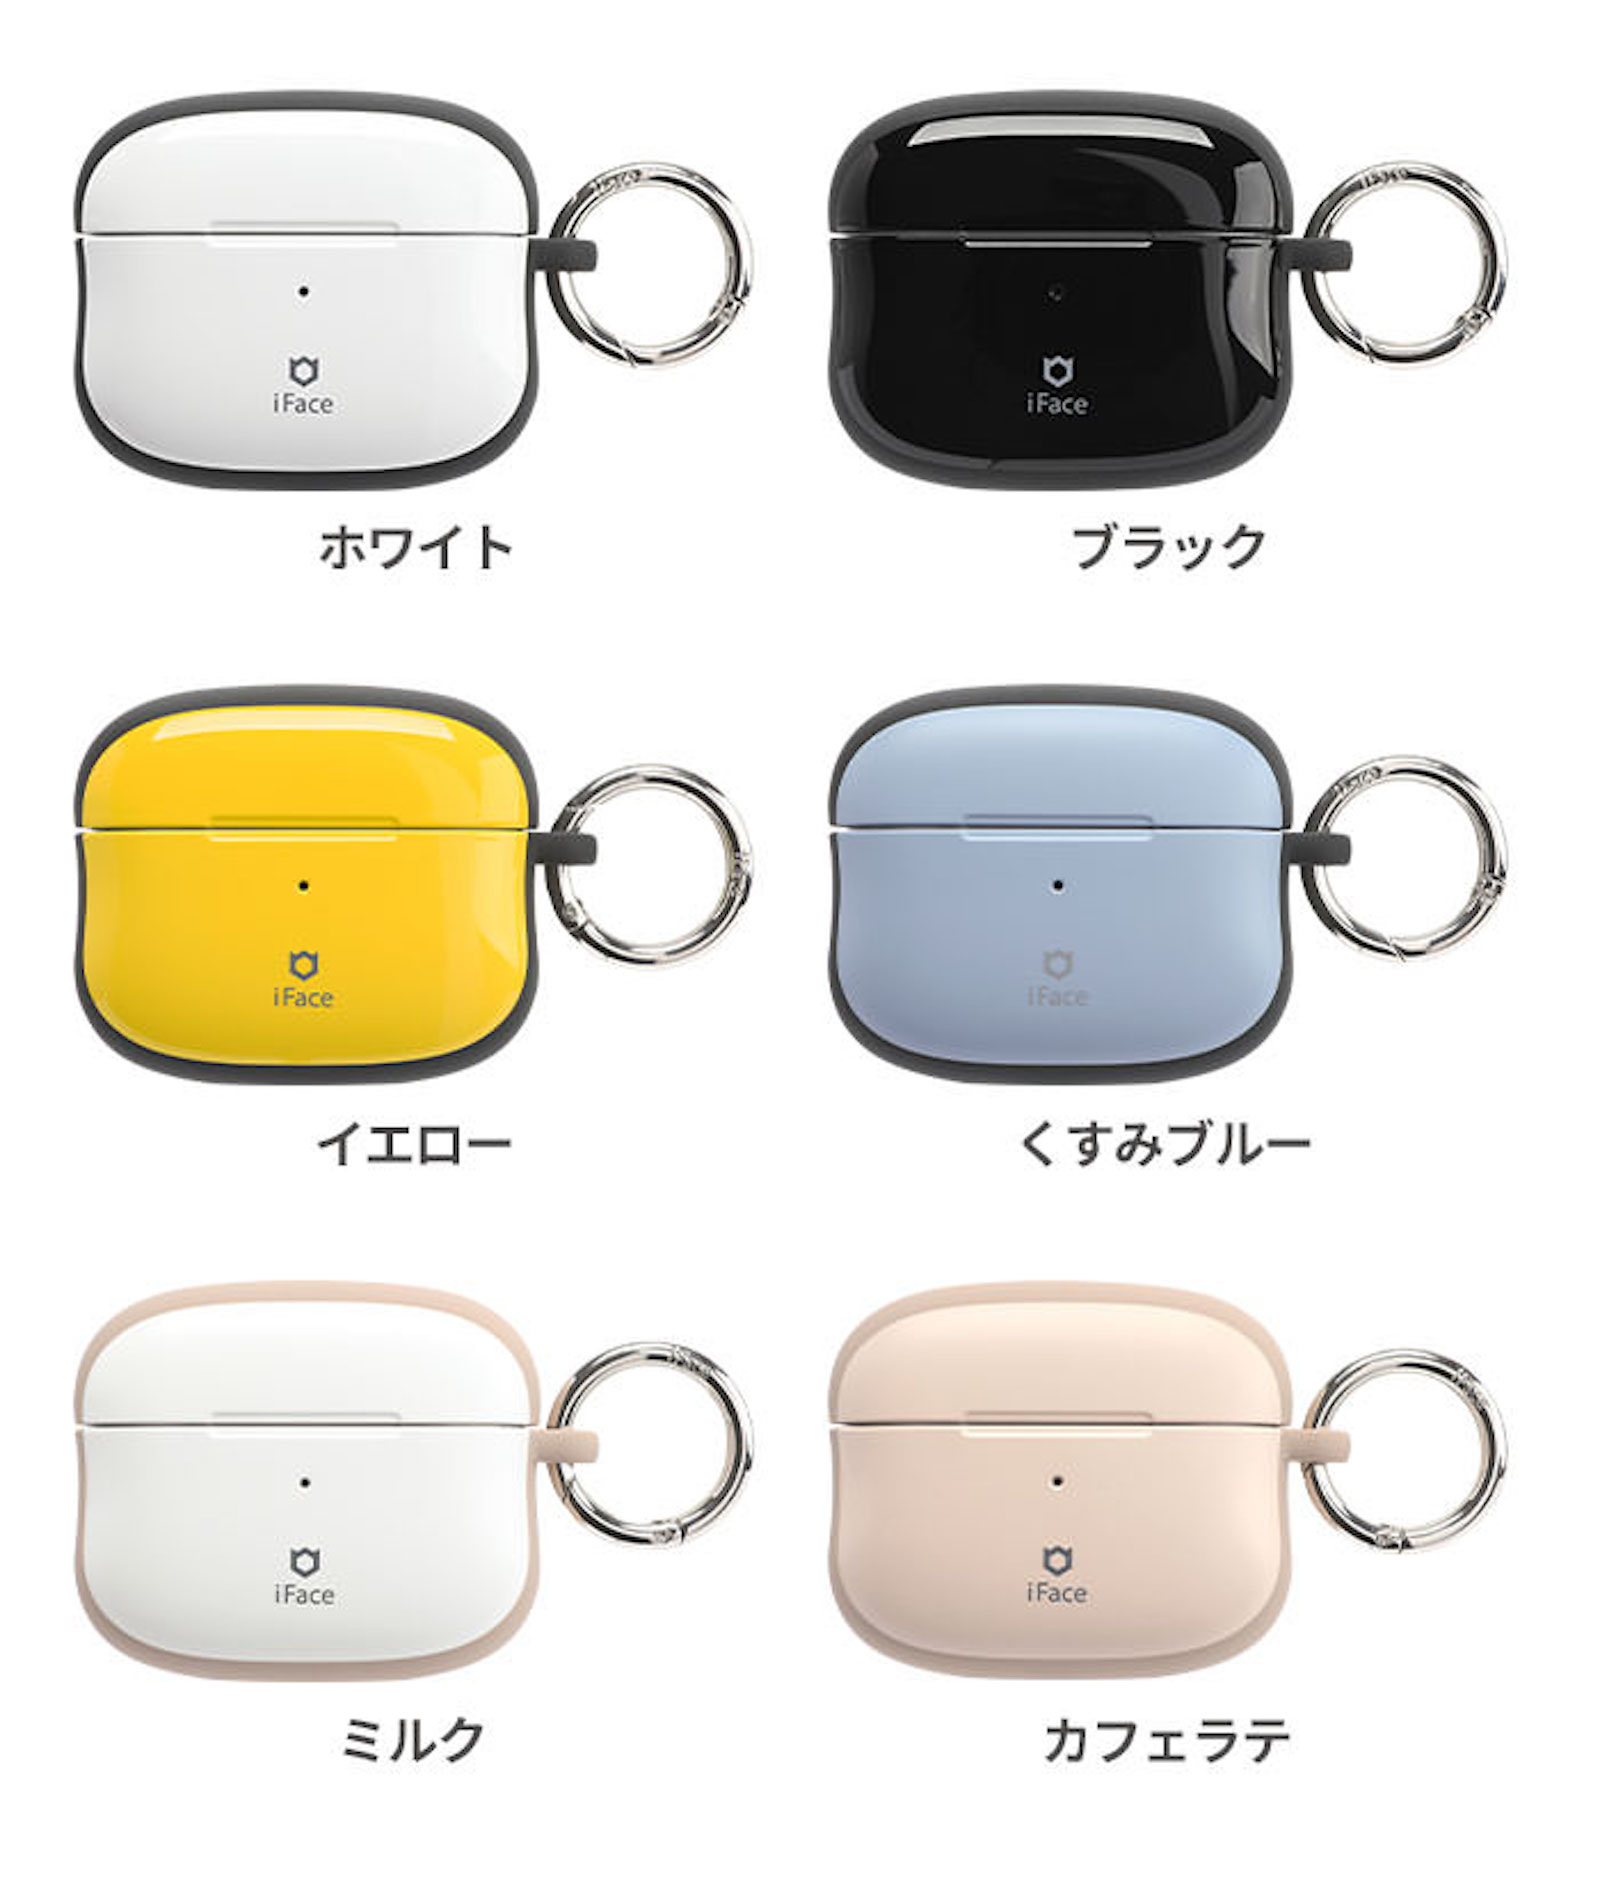 hamee-iface-airpods-cases-2.jpg